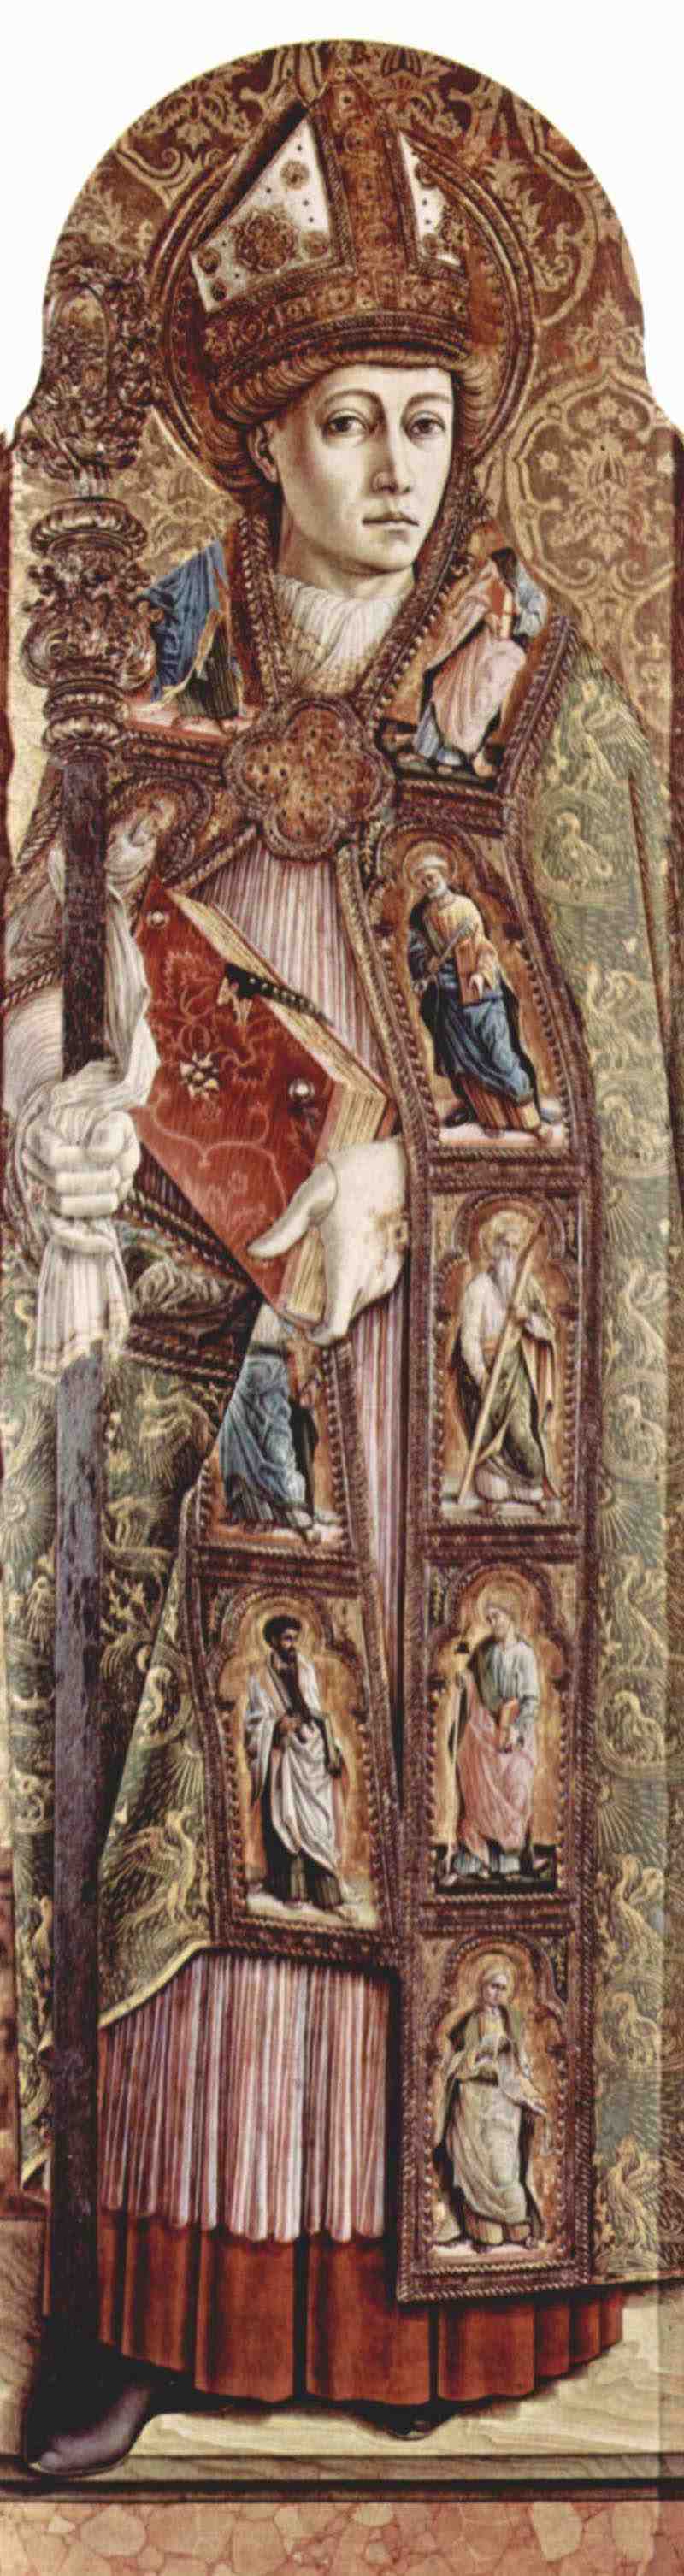 Main altar of the Cathedral of Ascoli, polyptych, right inner panel: St. Emidius. Carlo Crivelli